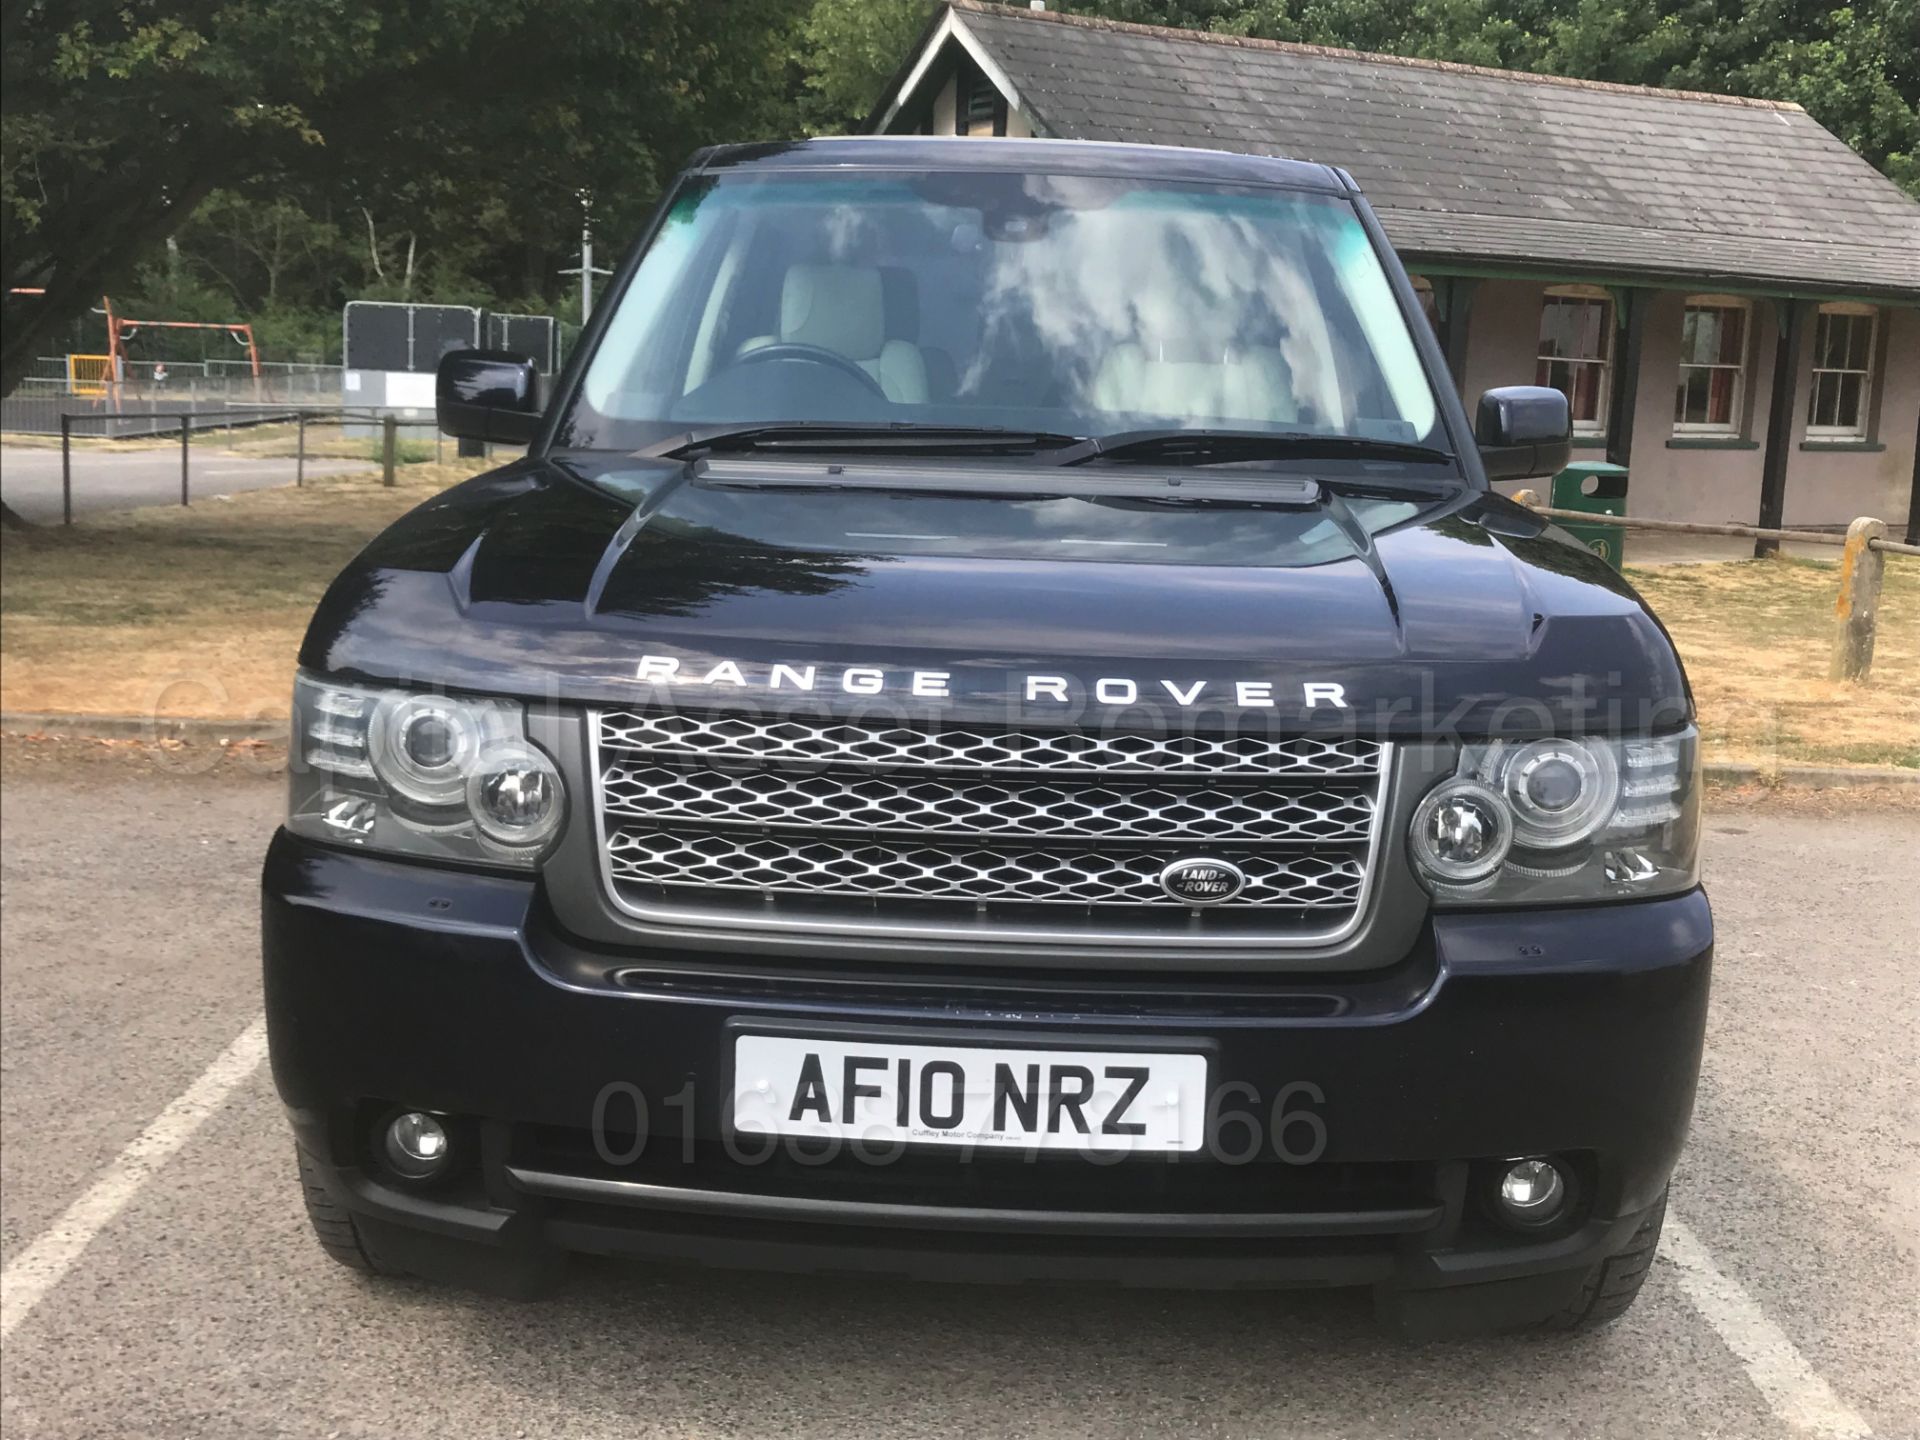 (On Sale) RANGE ROVER VOGUE **SE EDITION** (2010 - FACELIFT EDITION) 'TDV8 - 268 BHP - AUTO' **WOW** - Image 3 of 62